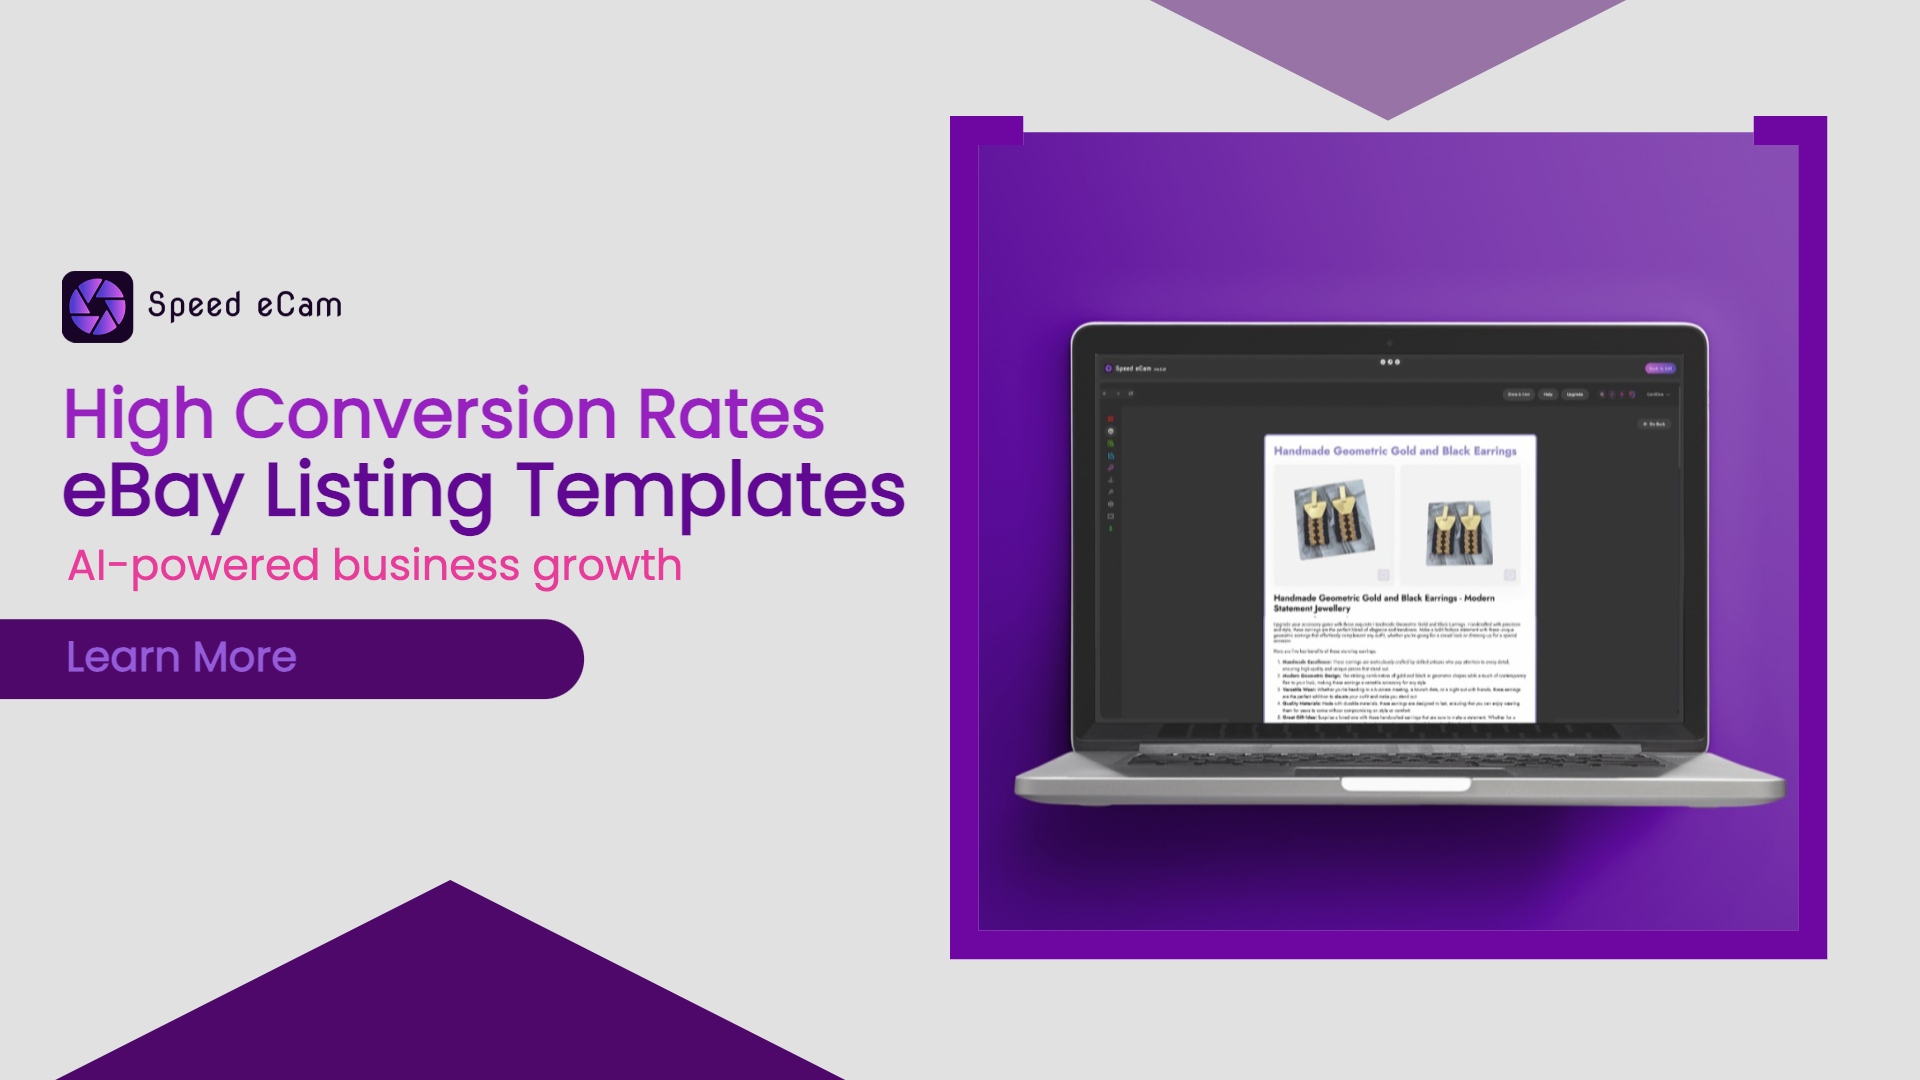 The Path to High Conversion Rates: eBay Listing Templates